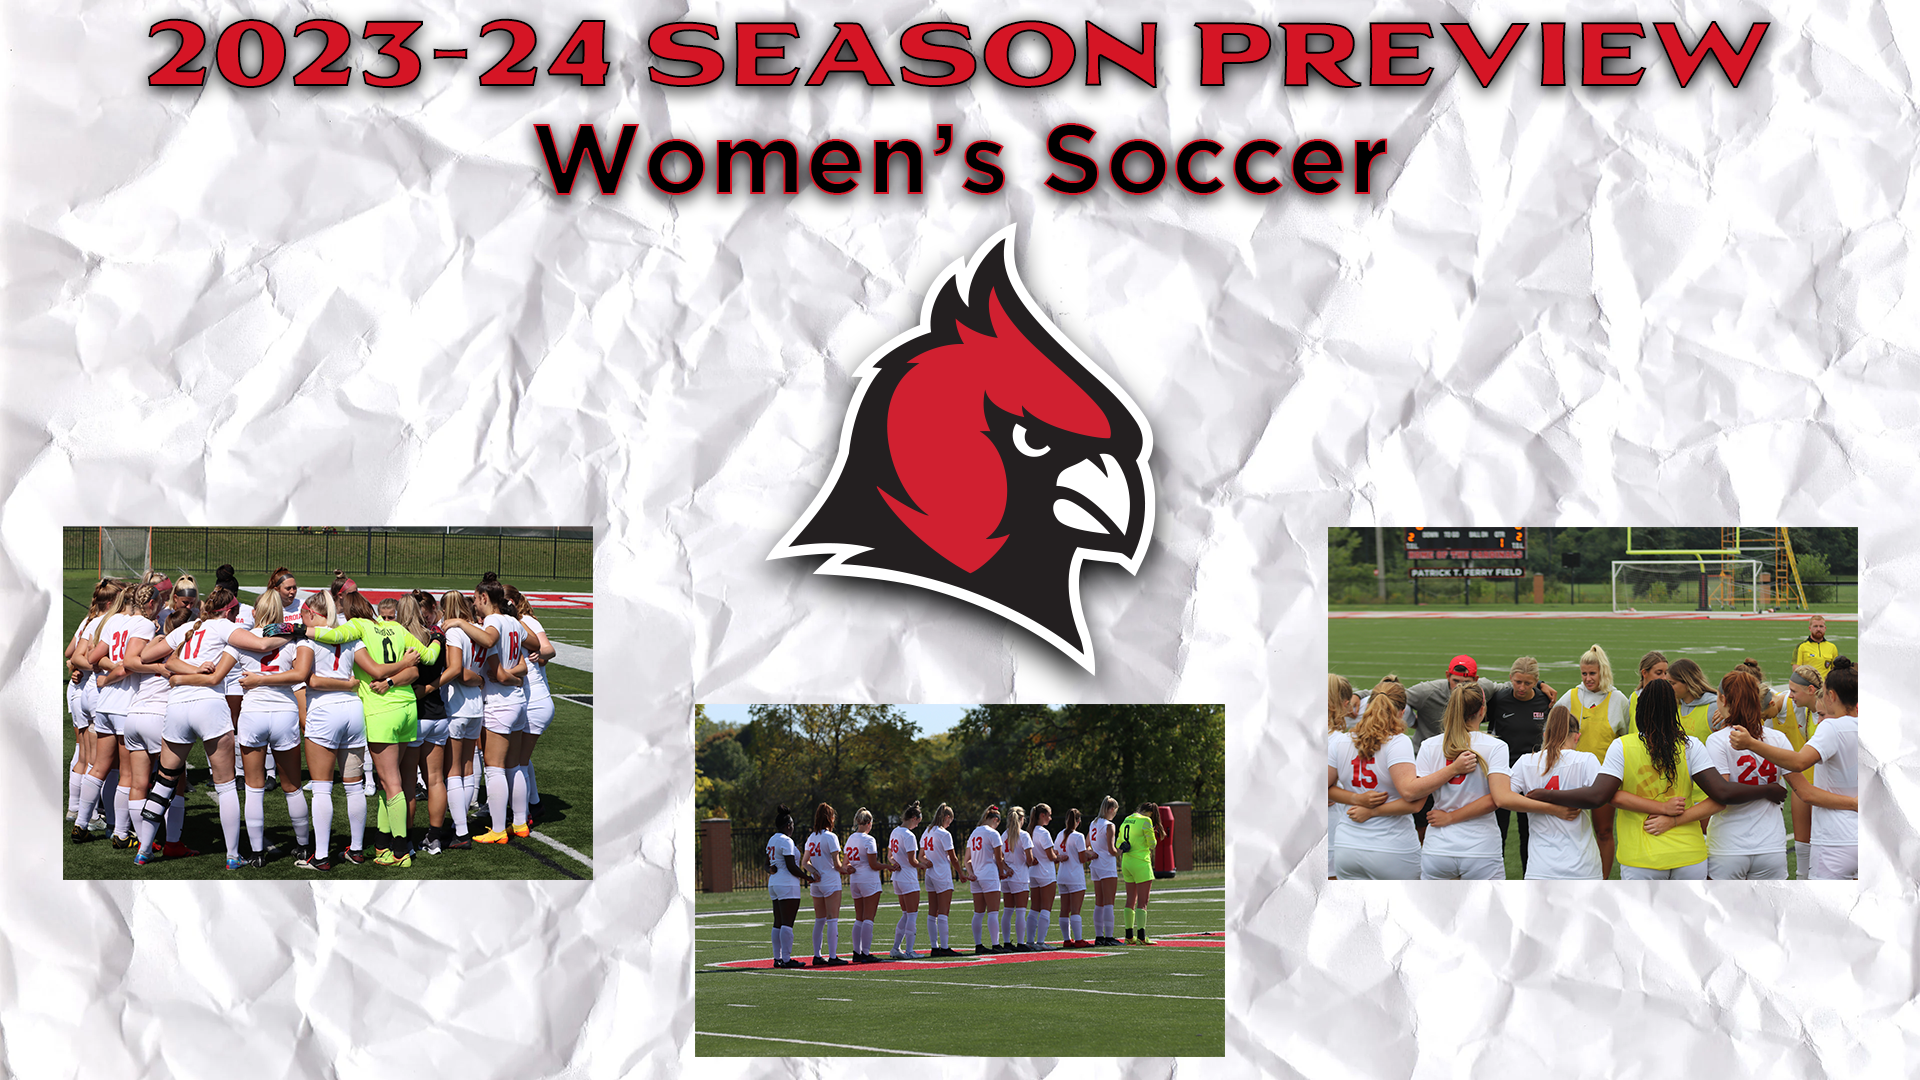 SEASON PREVIEW: Women's Soccer looks for improvement in 2023 Campaign